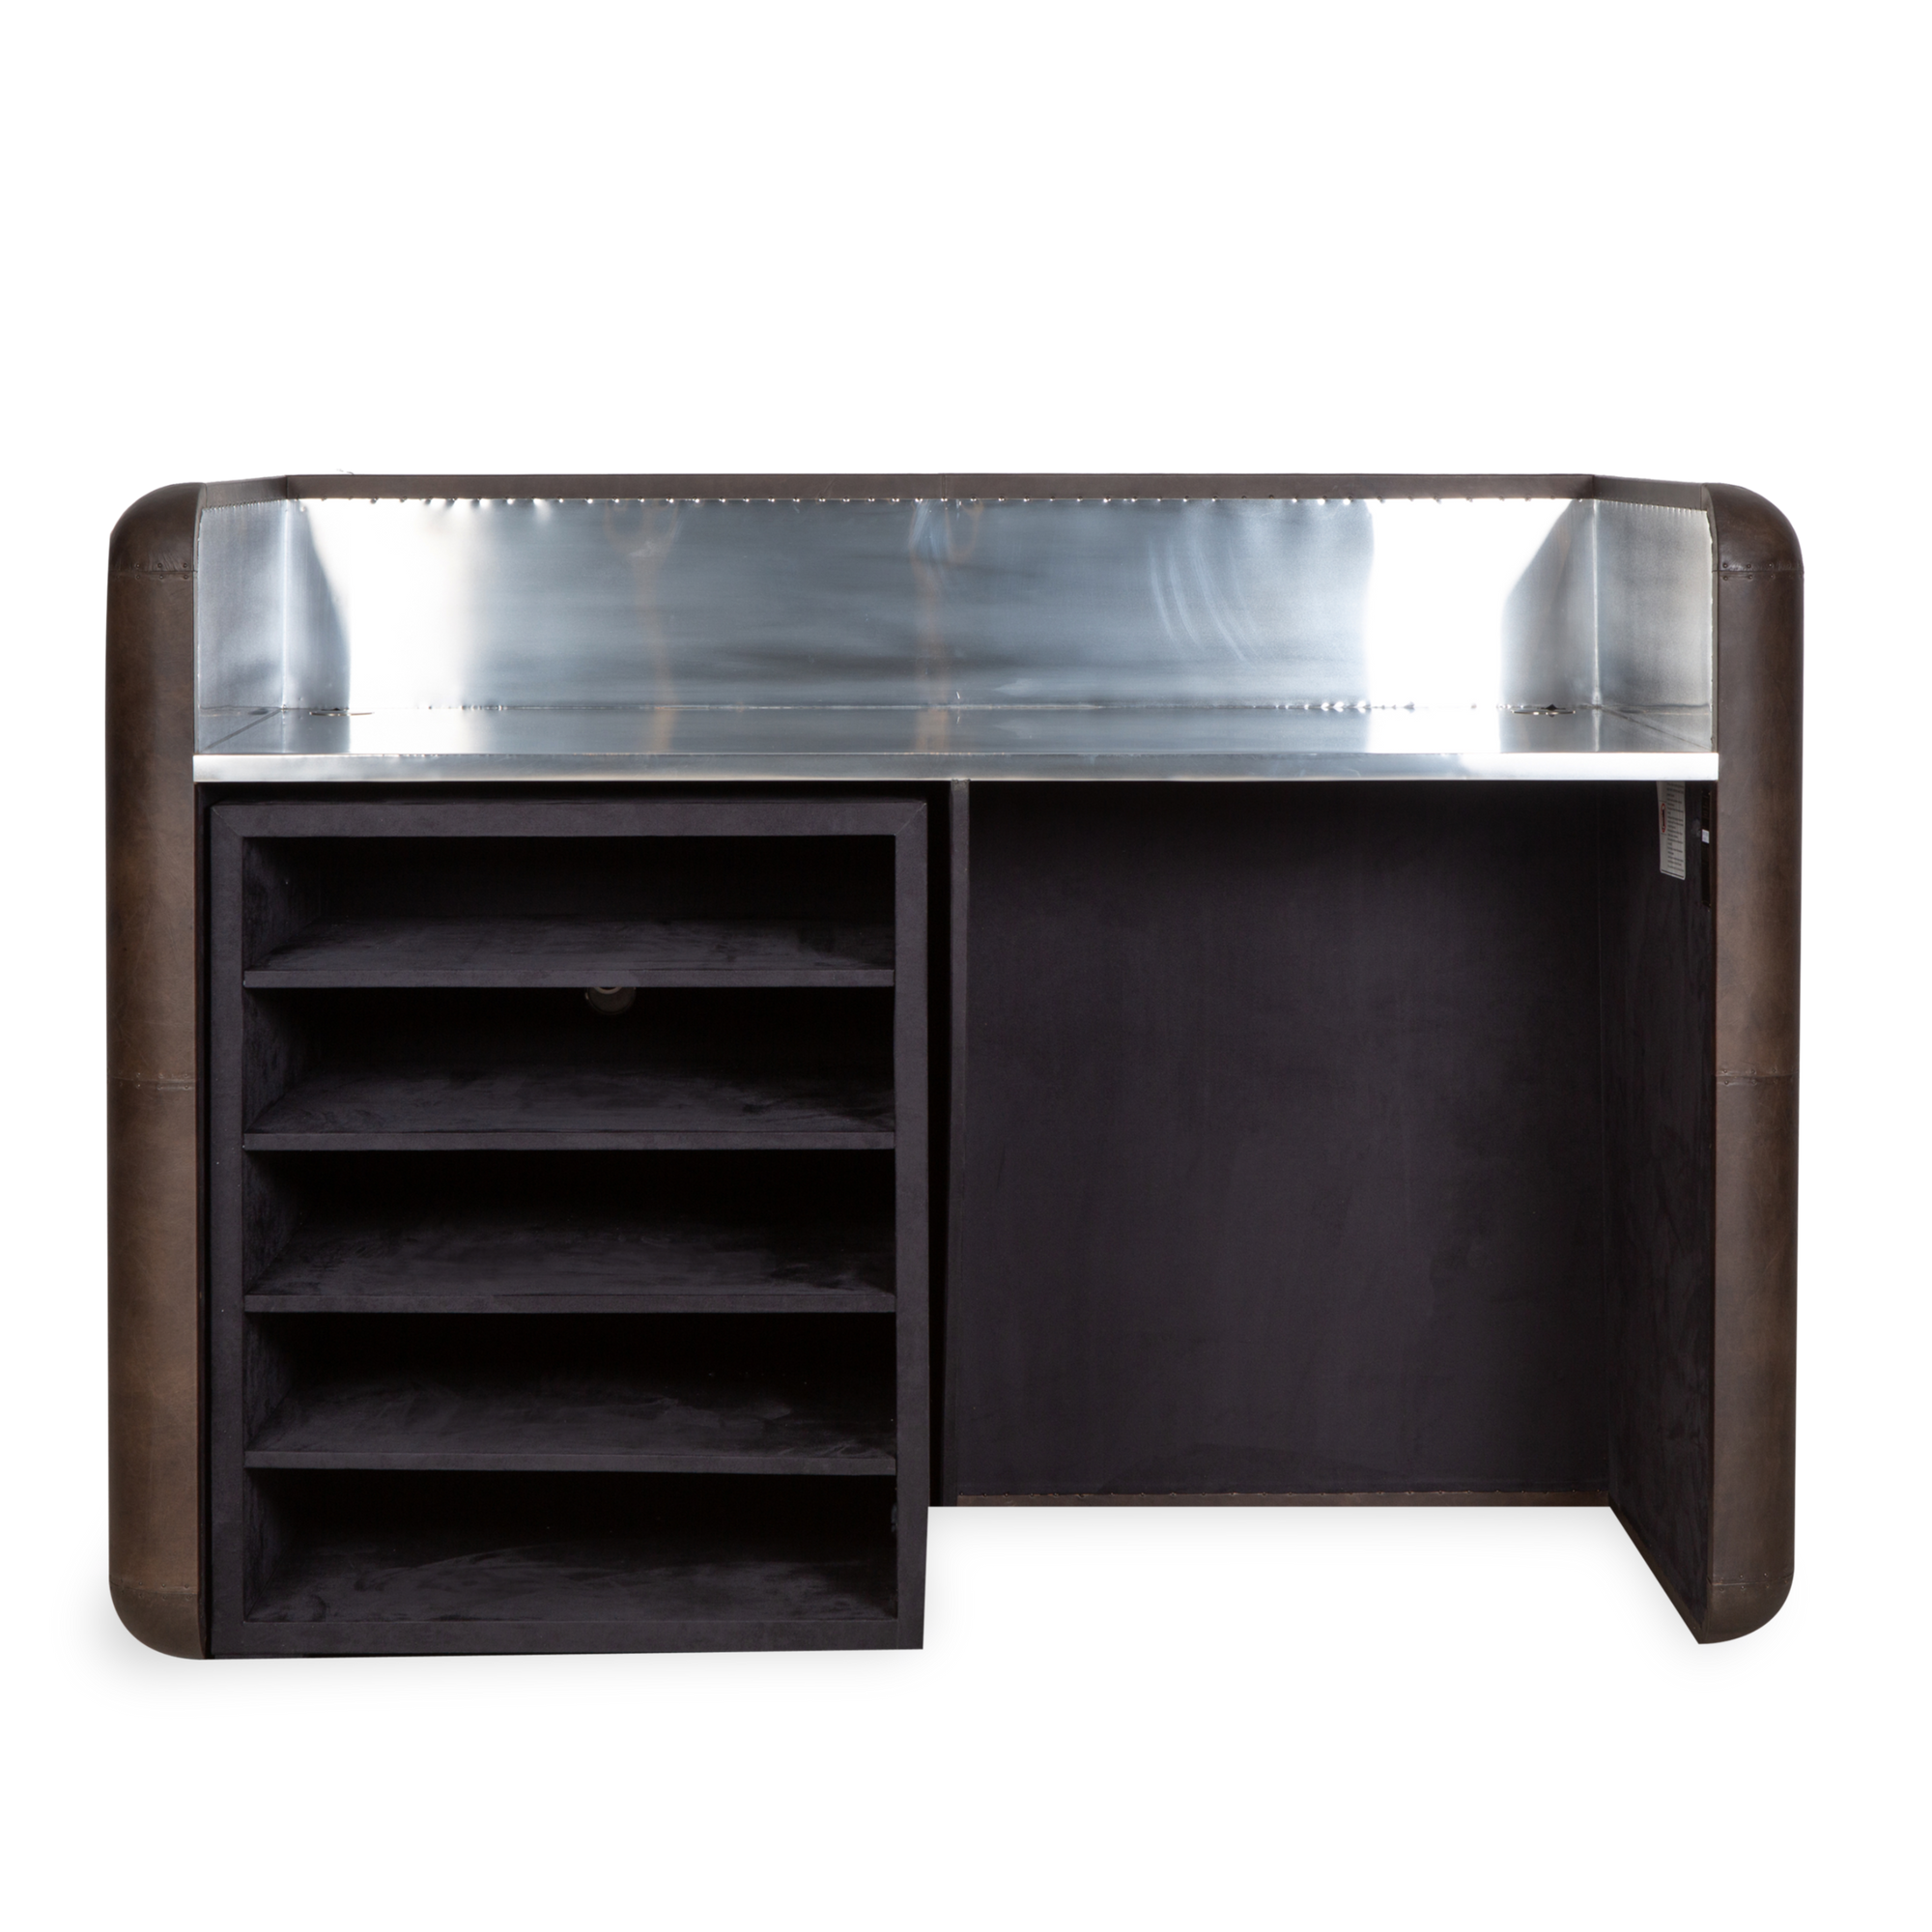 The sensorial Hudson Bar can house everything you need for a great night in, whatever the occasion.